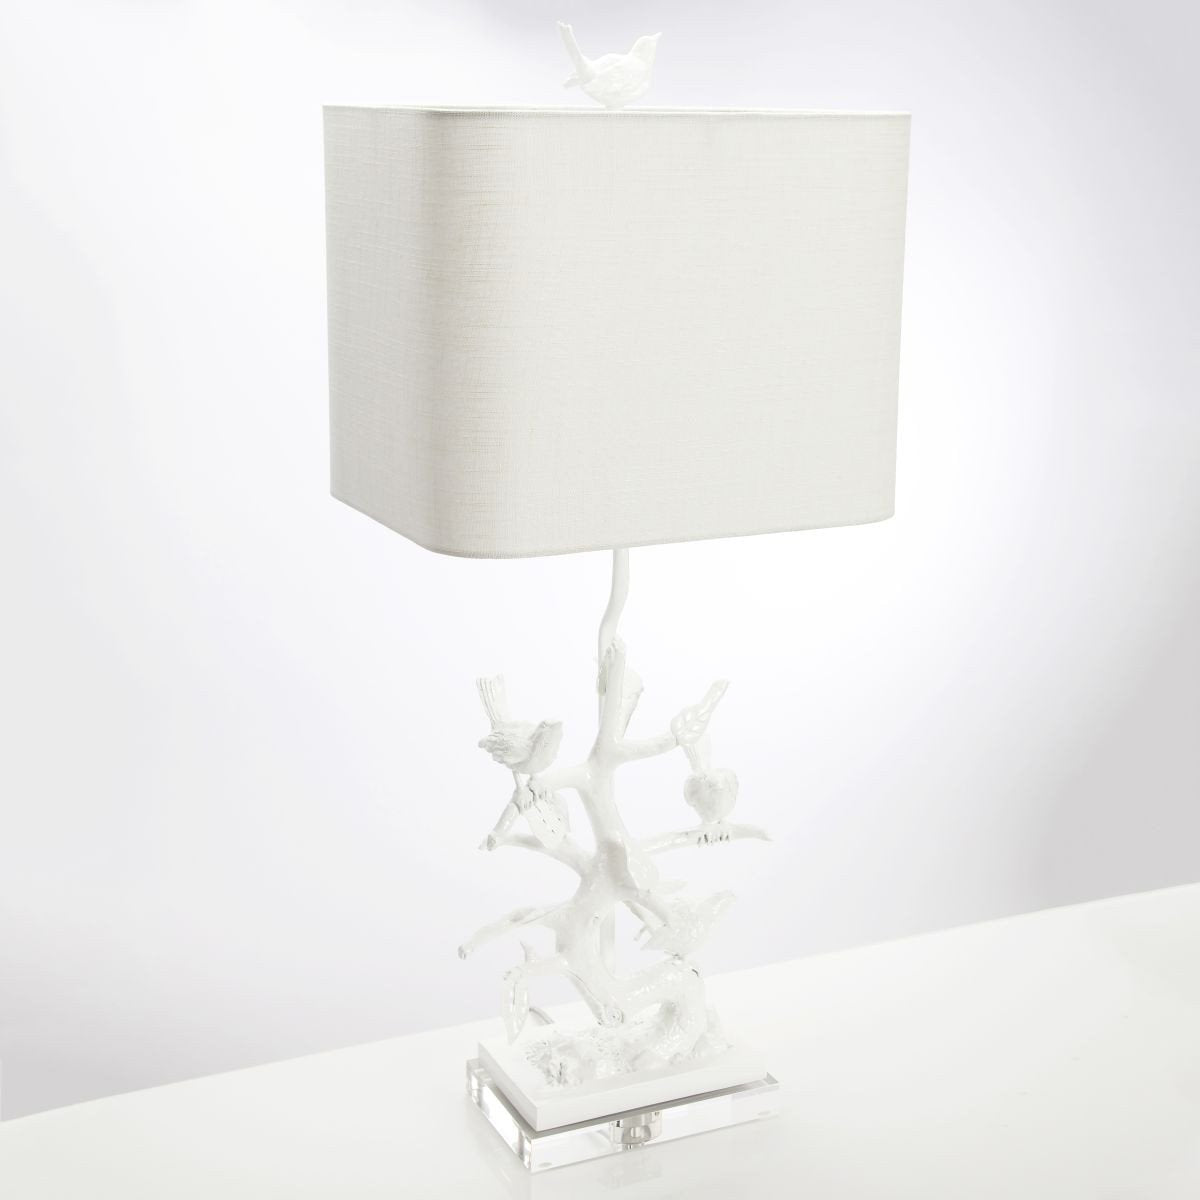 Bird on Branch Table Lamp design by Couture Lamps